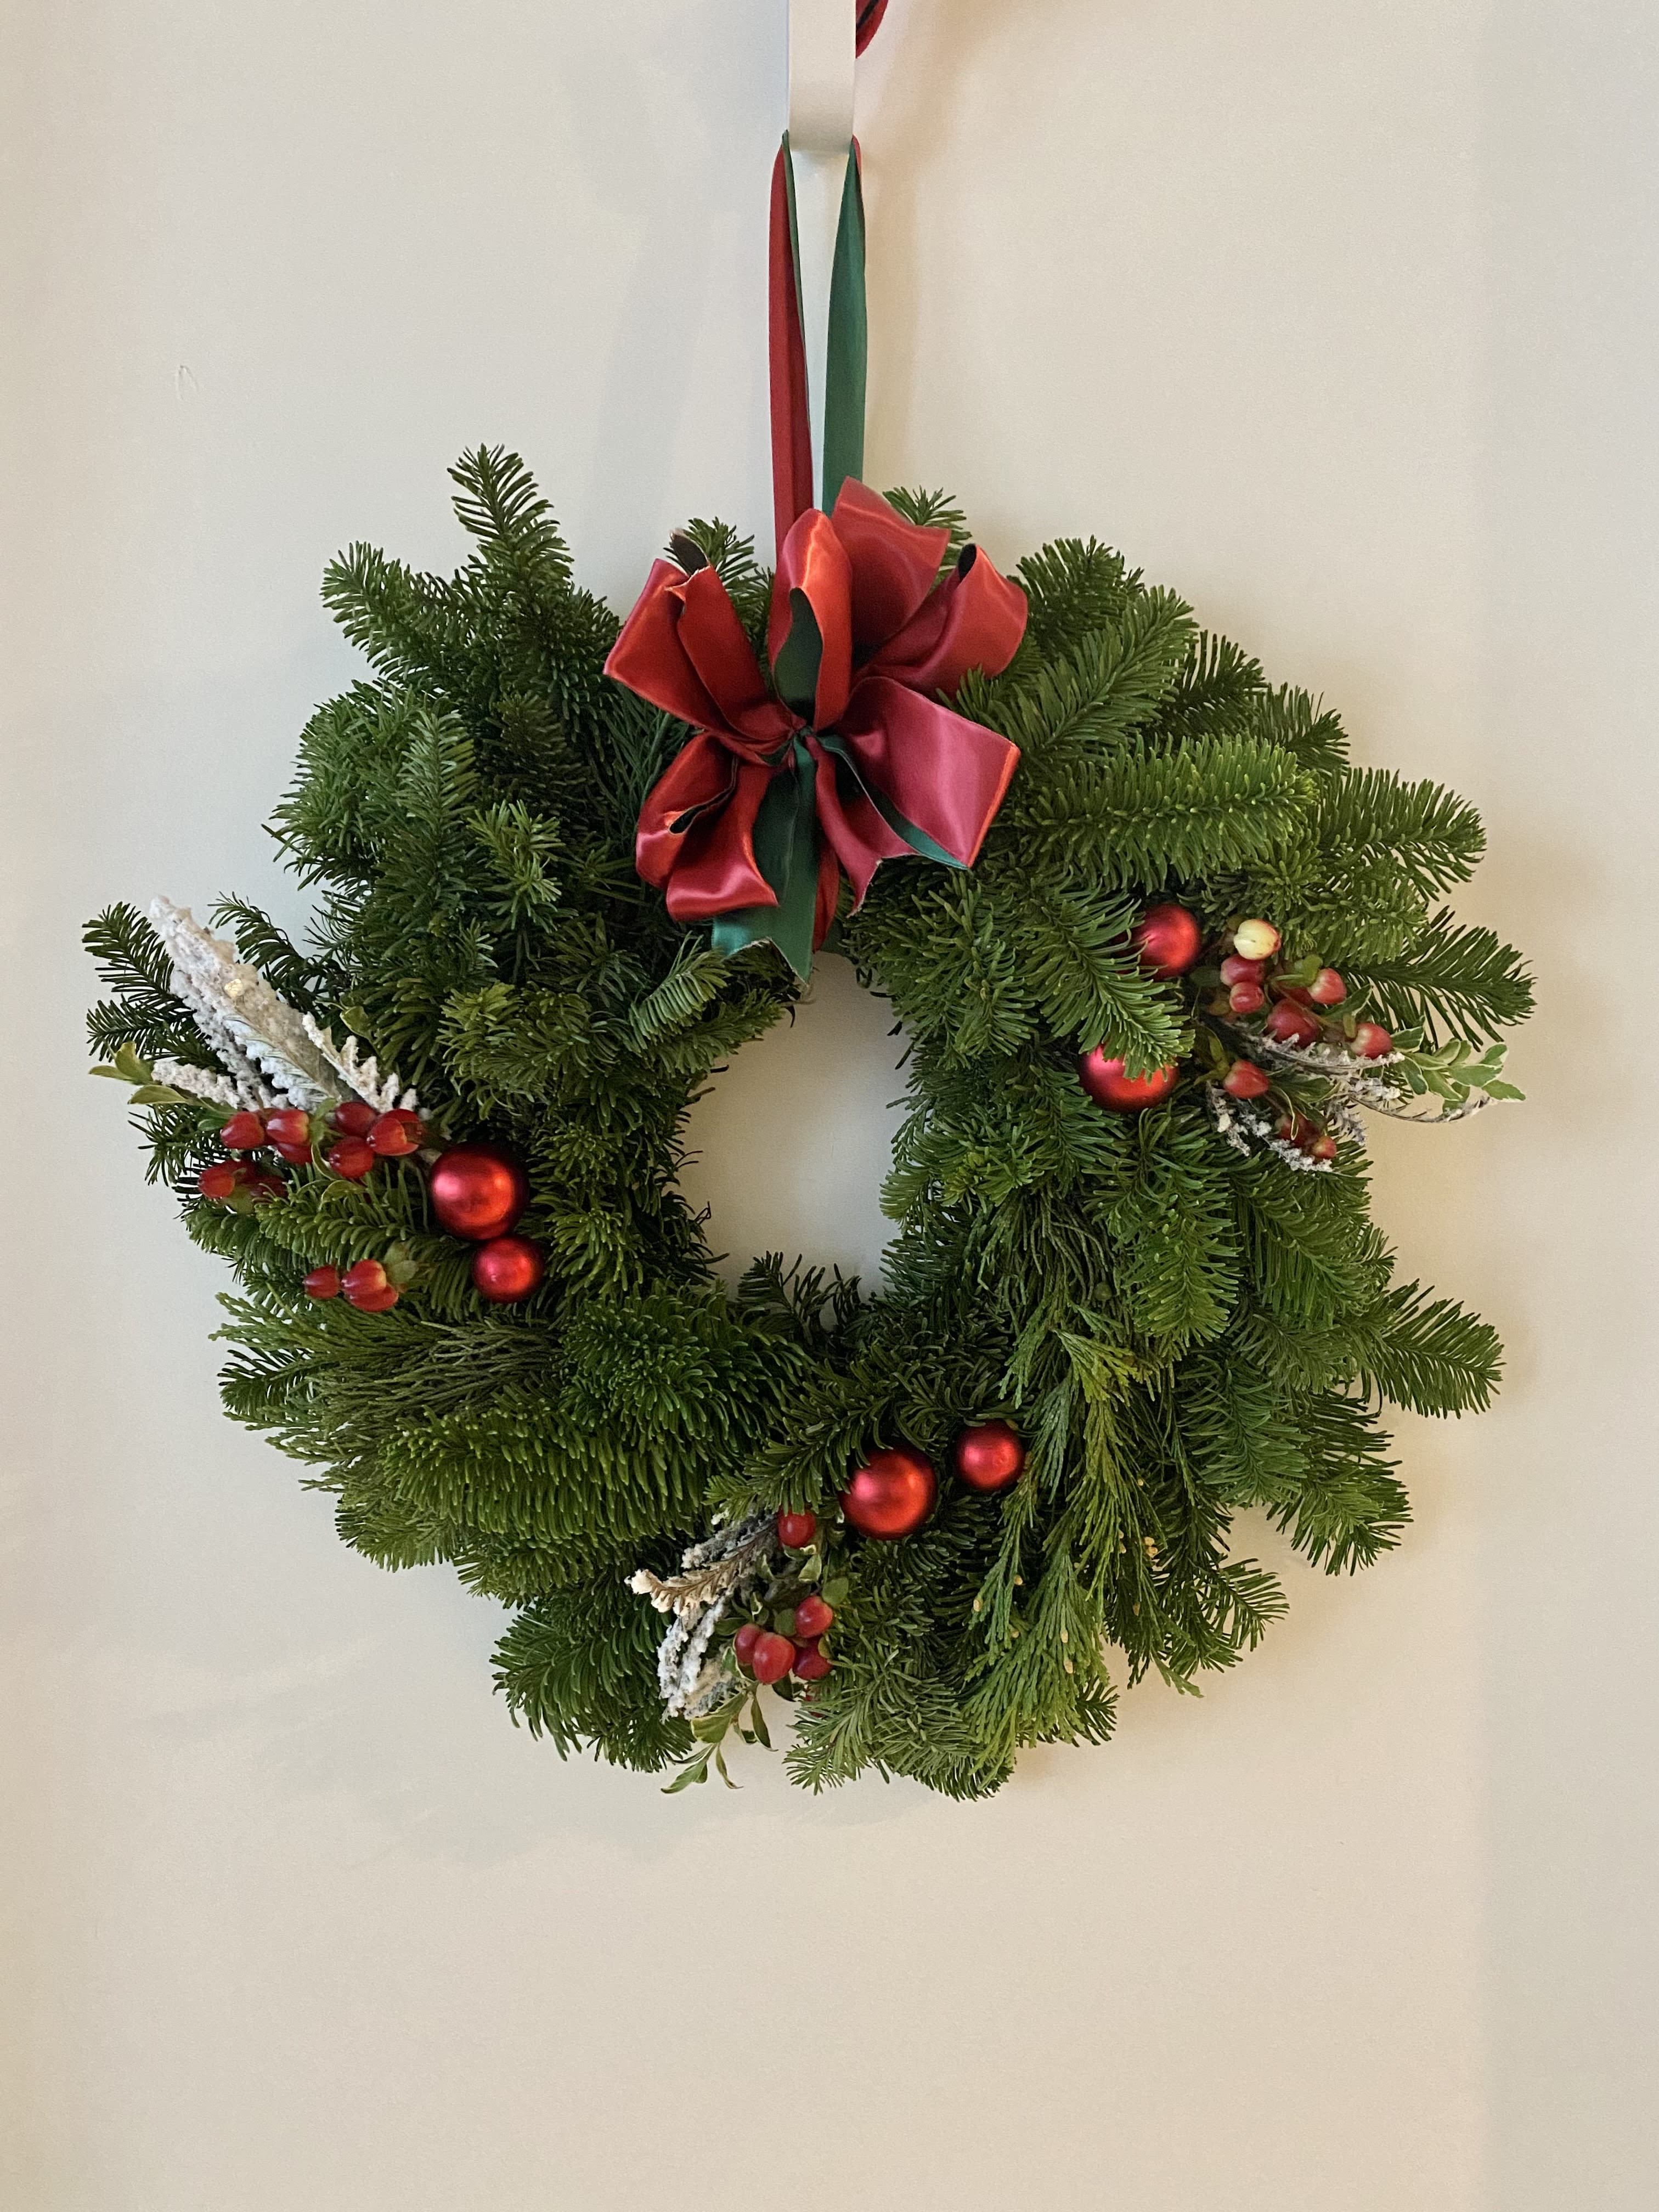 Classic Christmas Wreath - Deck the halls in classic Christmas style! Our traditional wreath is crafted from fresh-cut, fragrant evergreens and accented with red berries. A red and green bow and red point complete the look. 